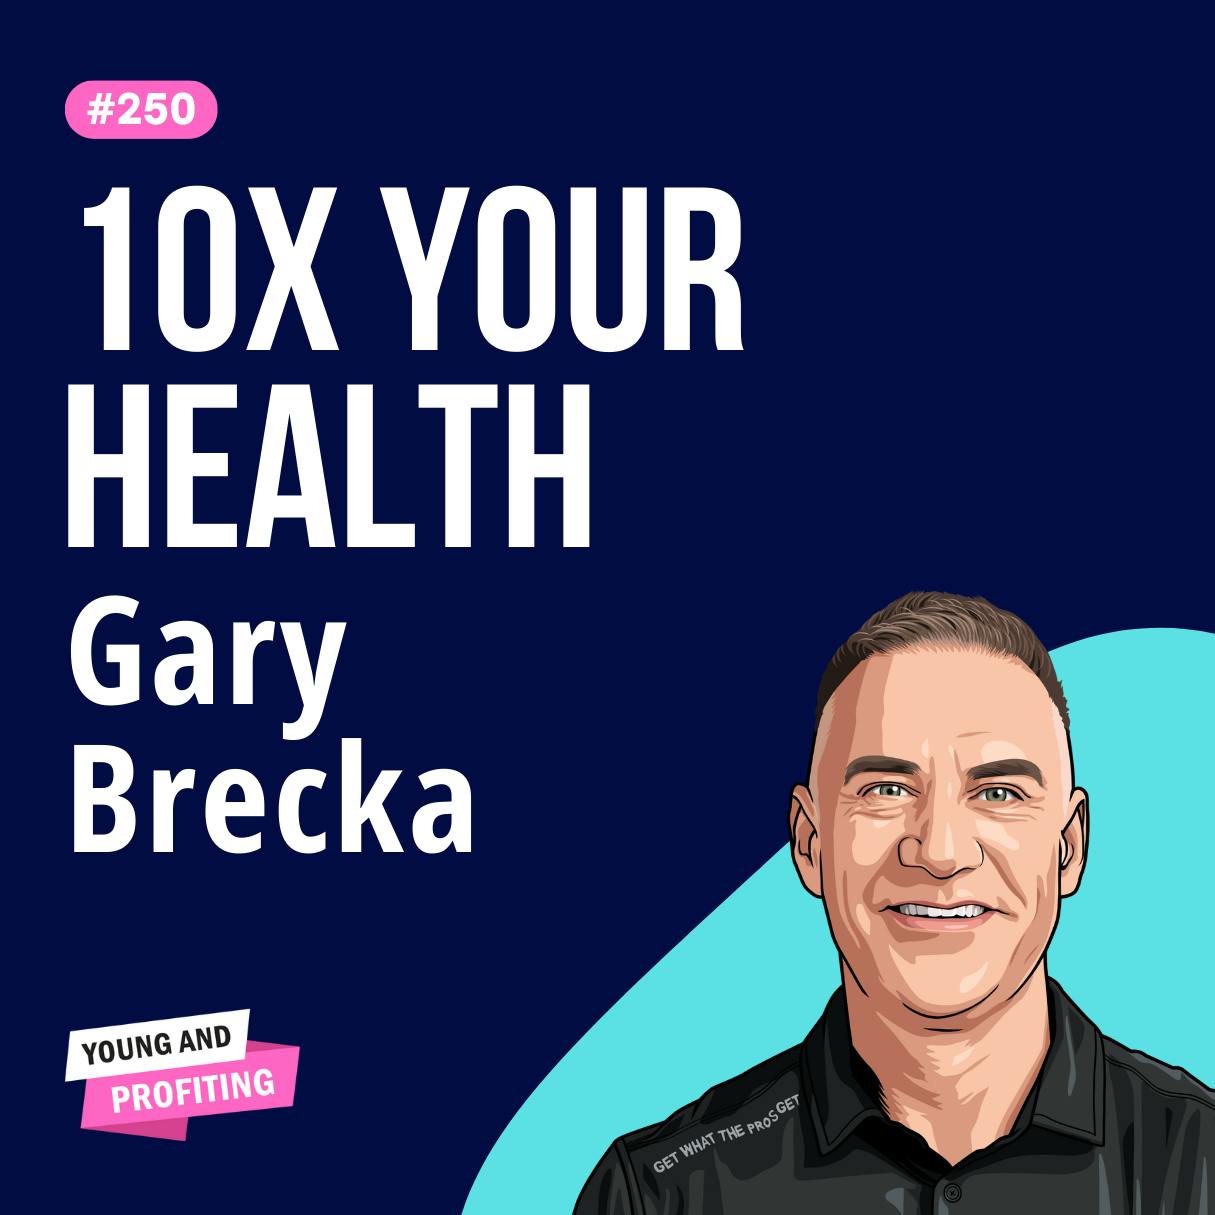 Gary Brecka: I Can Predict How Long You Have Left to Live! 10X Your Health With These 3 No-Cost Bio Hacks | E250 by Hala Taha | YAP Media Network